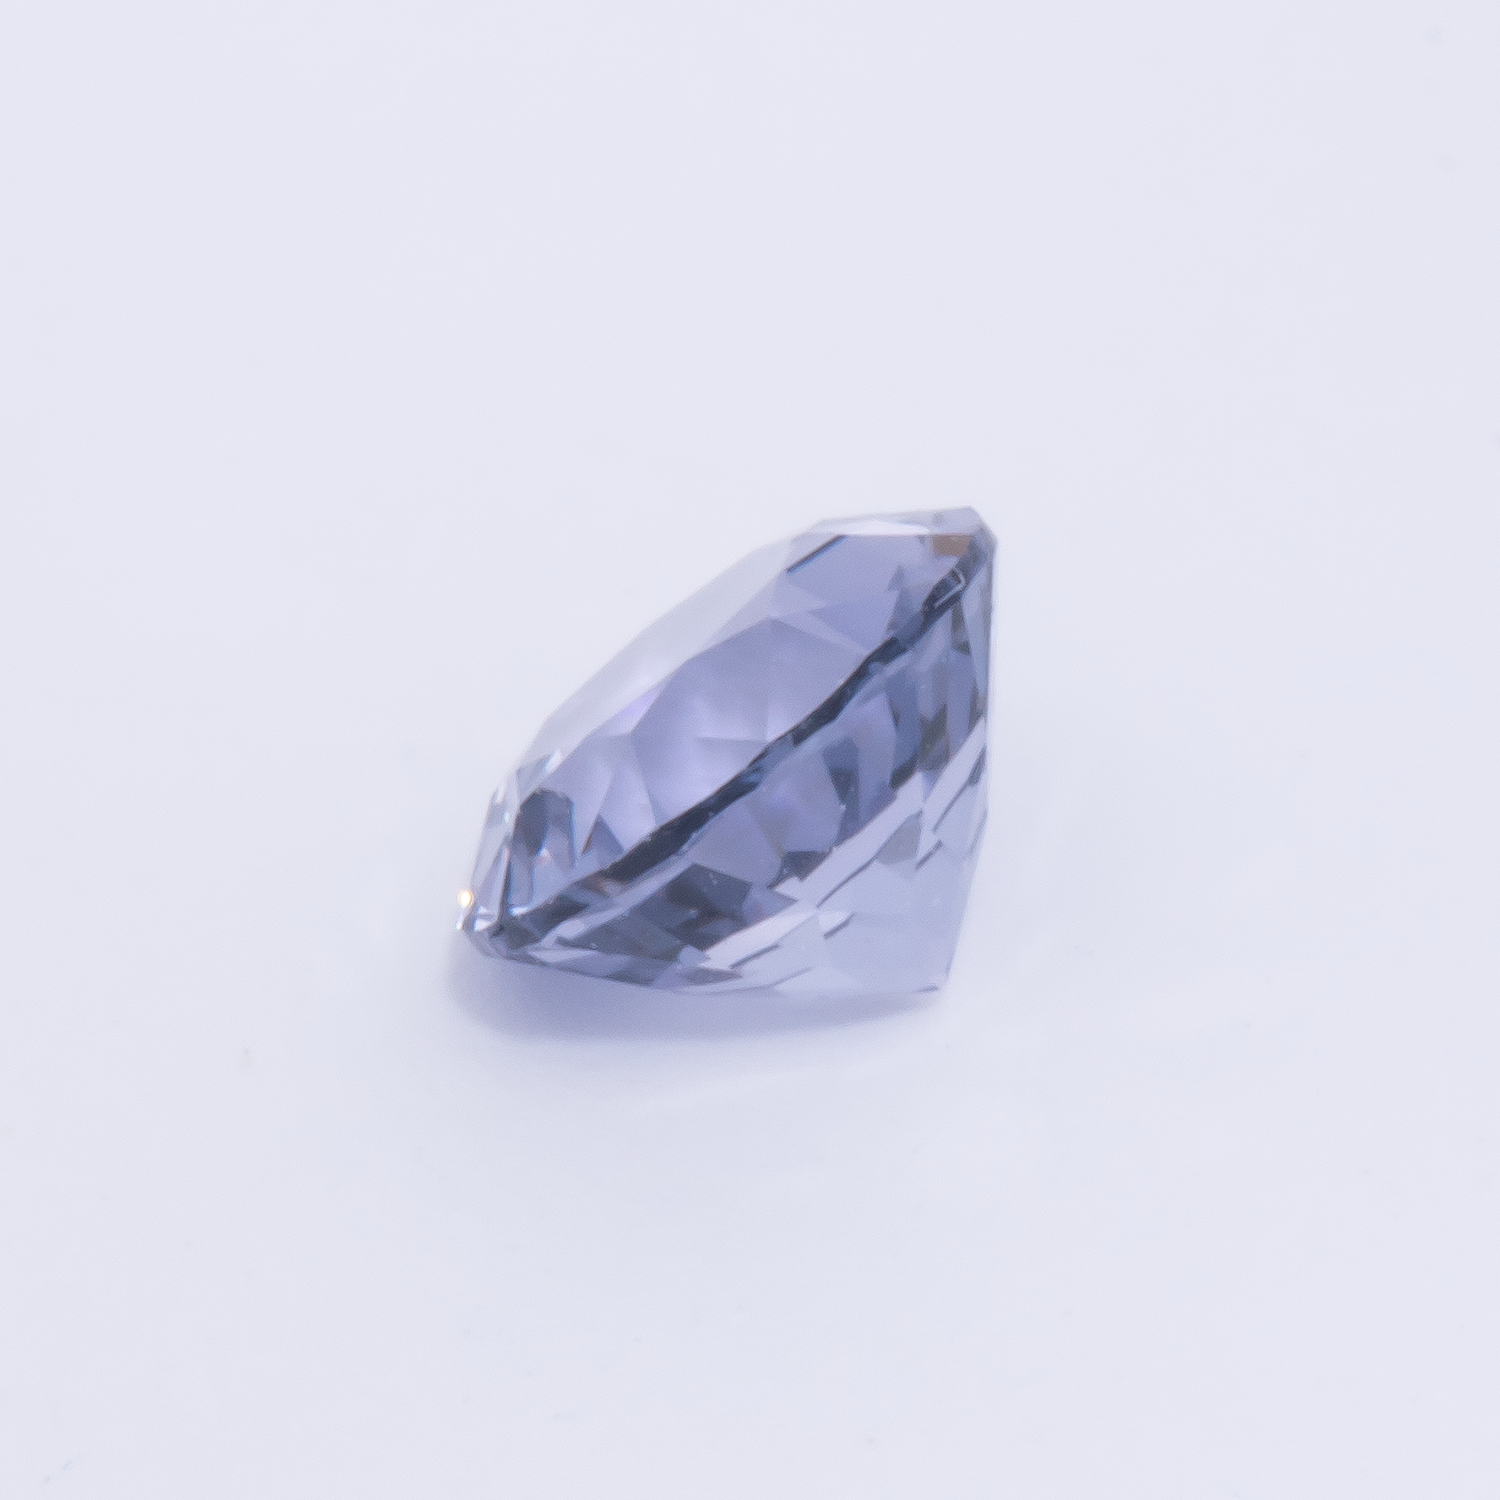 Spinell - lila, rund, 4.5x4.5 mm, 0.44 cts, Nr. SP90066